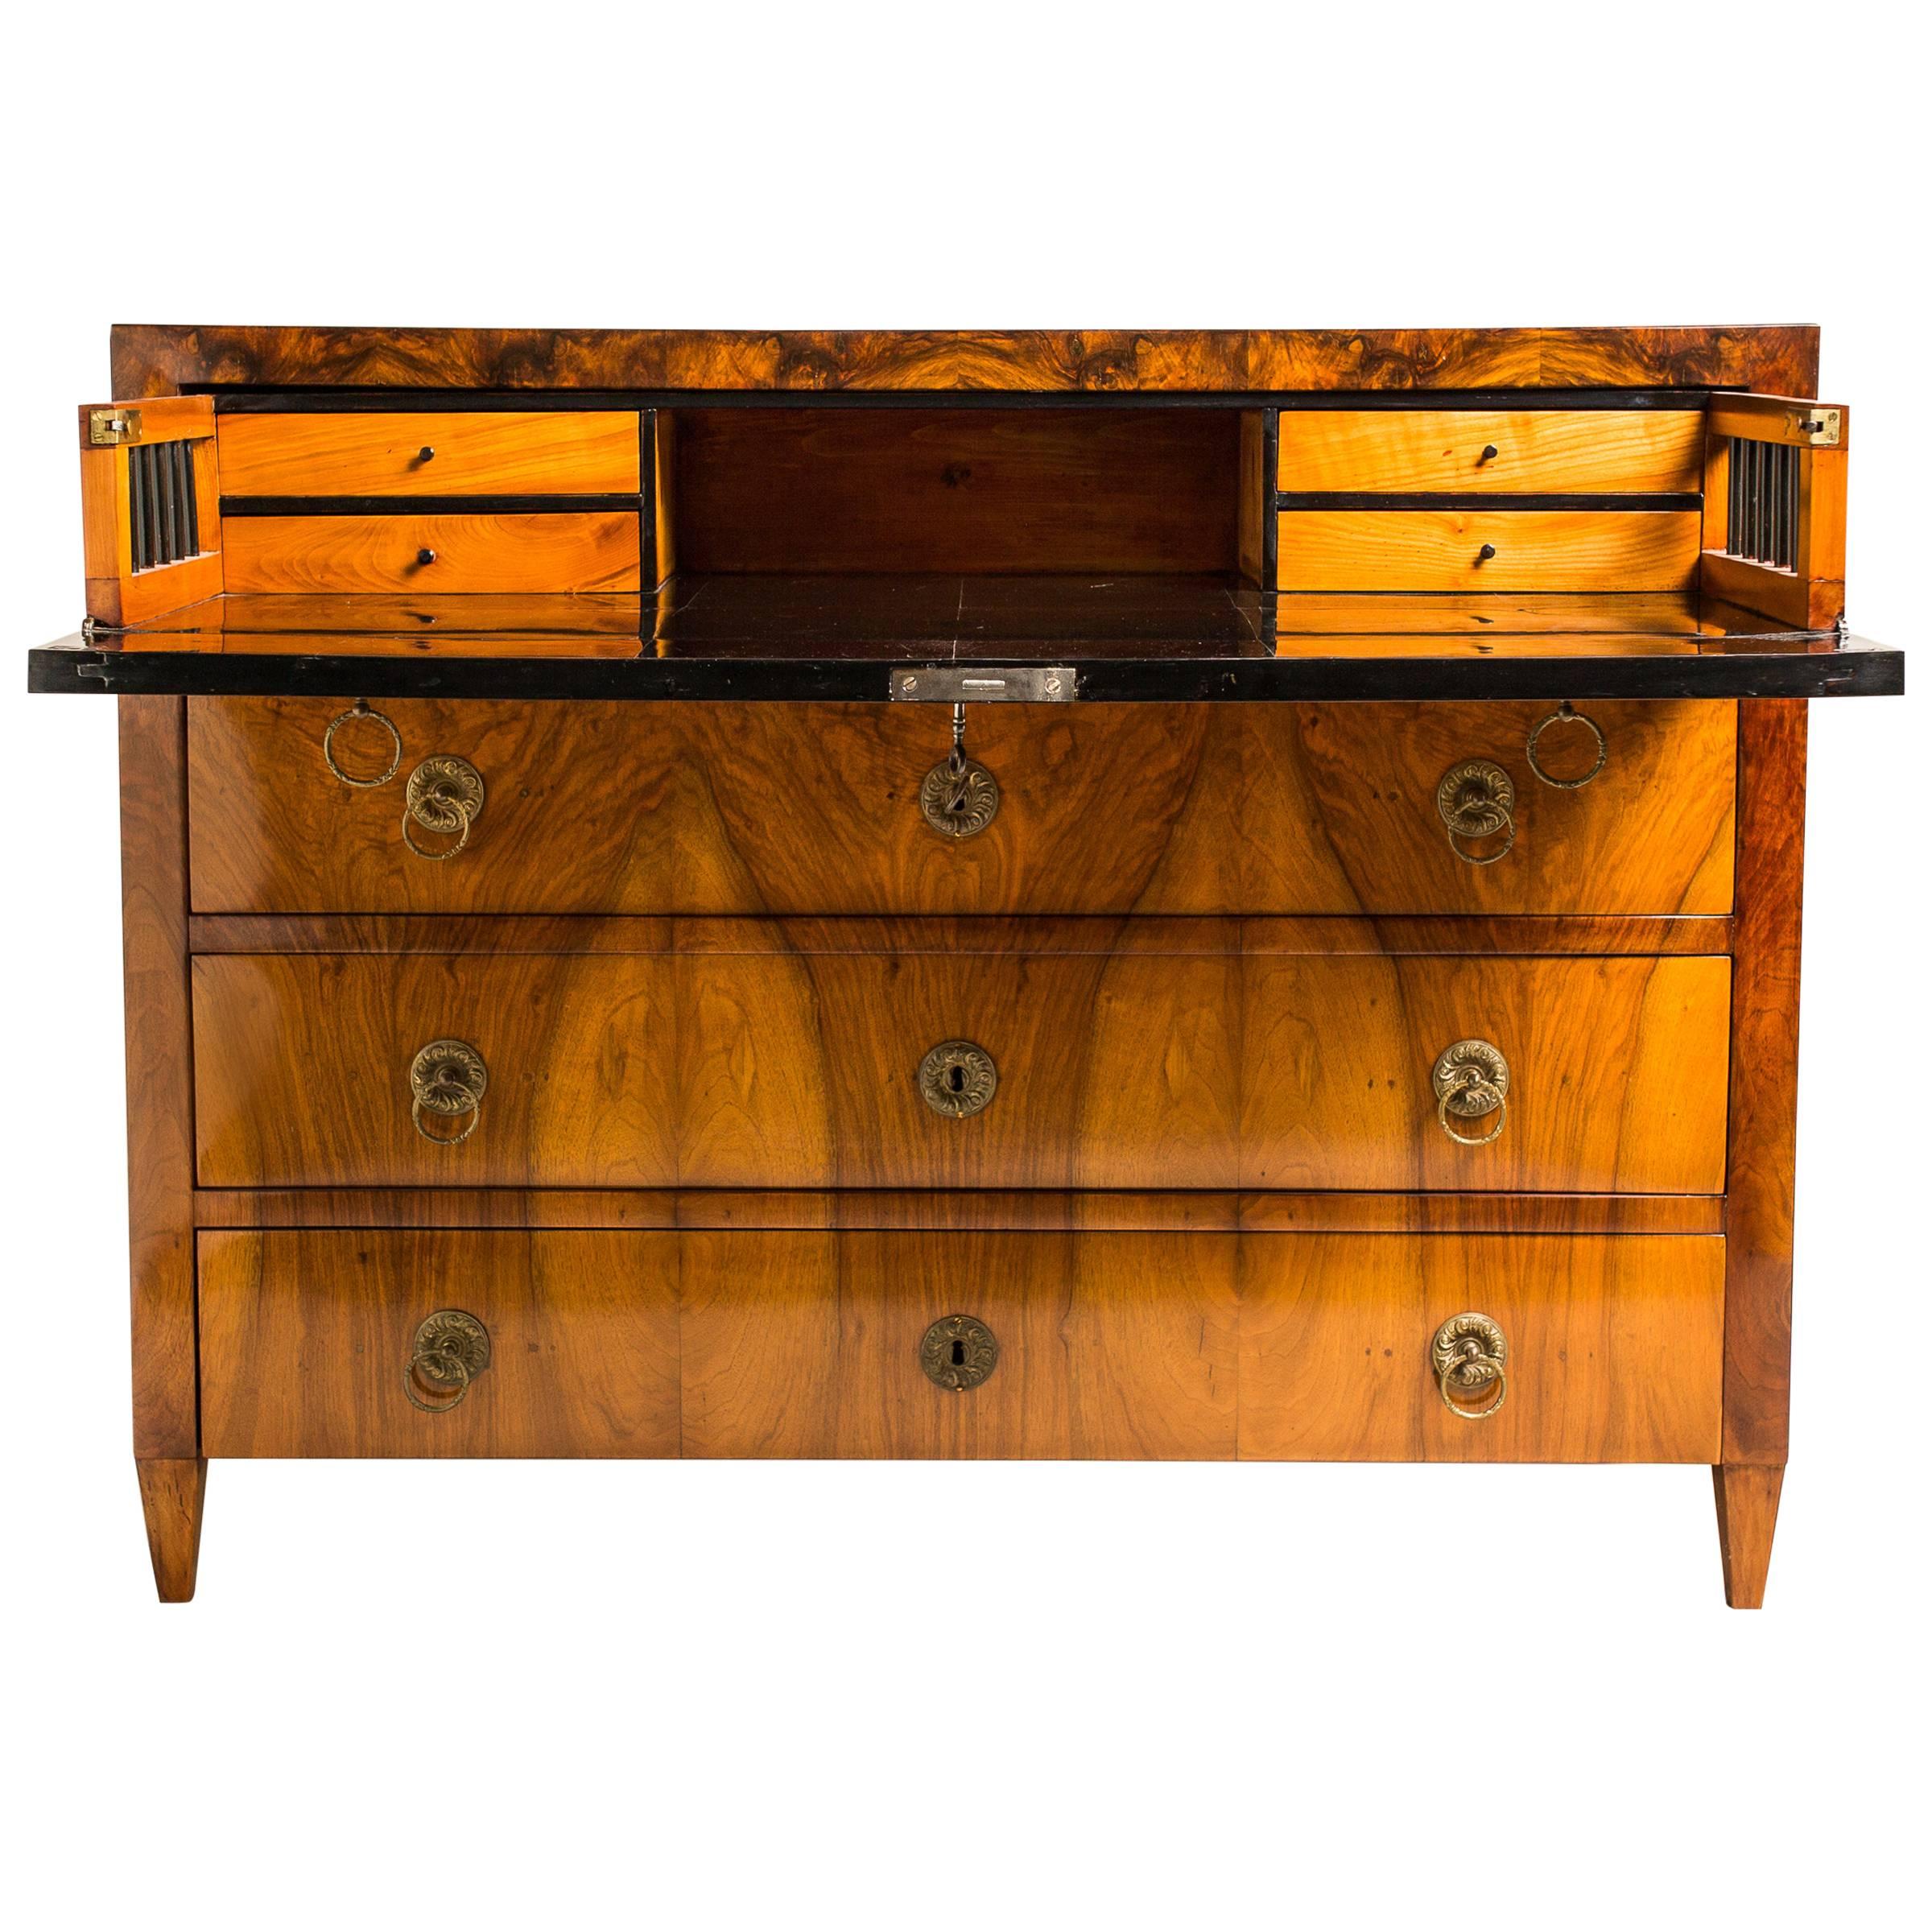 This outstanding Biedermeier conversion or writing desk has travelled through time from Austria in 1830 and is in search of the right home. The veneer with straight grained walnut is enhanced by the brass handles. Standing on firm legs constructed